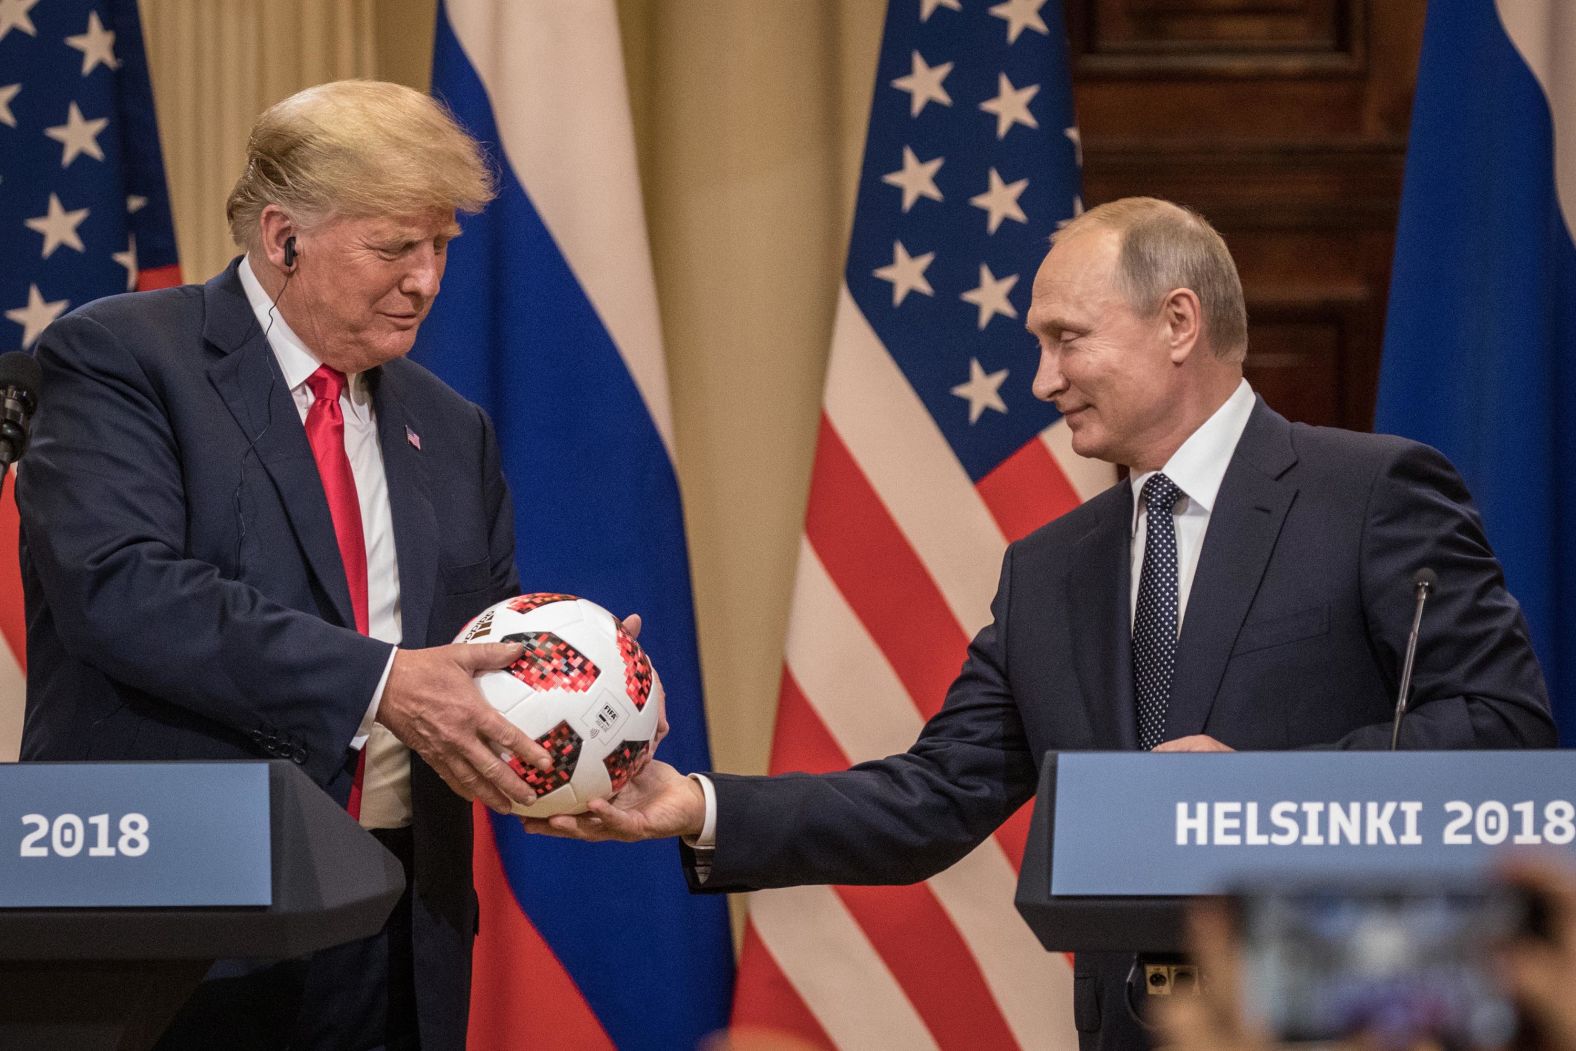 Putin hands Trump a World Cup soccer ball after <a href="https://www.cnn.com/interactive/2018/07/politics/trump-putin-summit-cnnphotos/" target="_blank">their summit </a>in Helsinki, Finland, in 2018. "Our relationship has never been worse than it is now. However, that changed as of about four hours ago. I really believe that," Trump said during a joint news conference held at the end of the summit. The meeting came just three days after indictments, handed down by special counsel Robert Mueller, charged 12 Russian intelligence officers with hacking into Democrats' computer networks and emails during the 2016 presidential race.